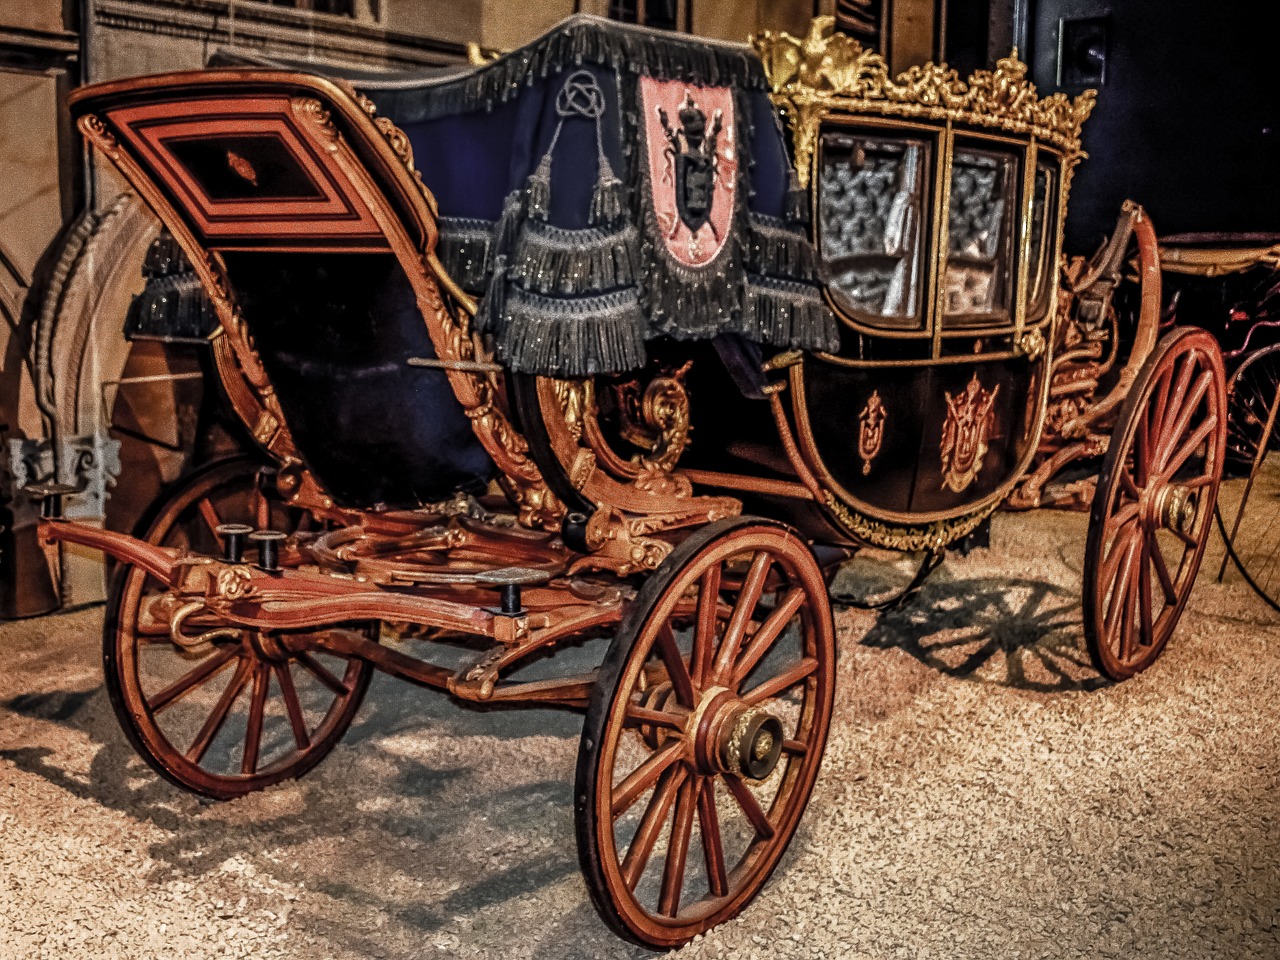 a horse drawn carriage sitting in front of a building, a colorized photo, by Mirabello Cavalori, shutterstock, baroque, dark ornate royal robes, displayed in the exhibition hall, hdr photo, royal crown